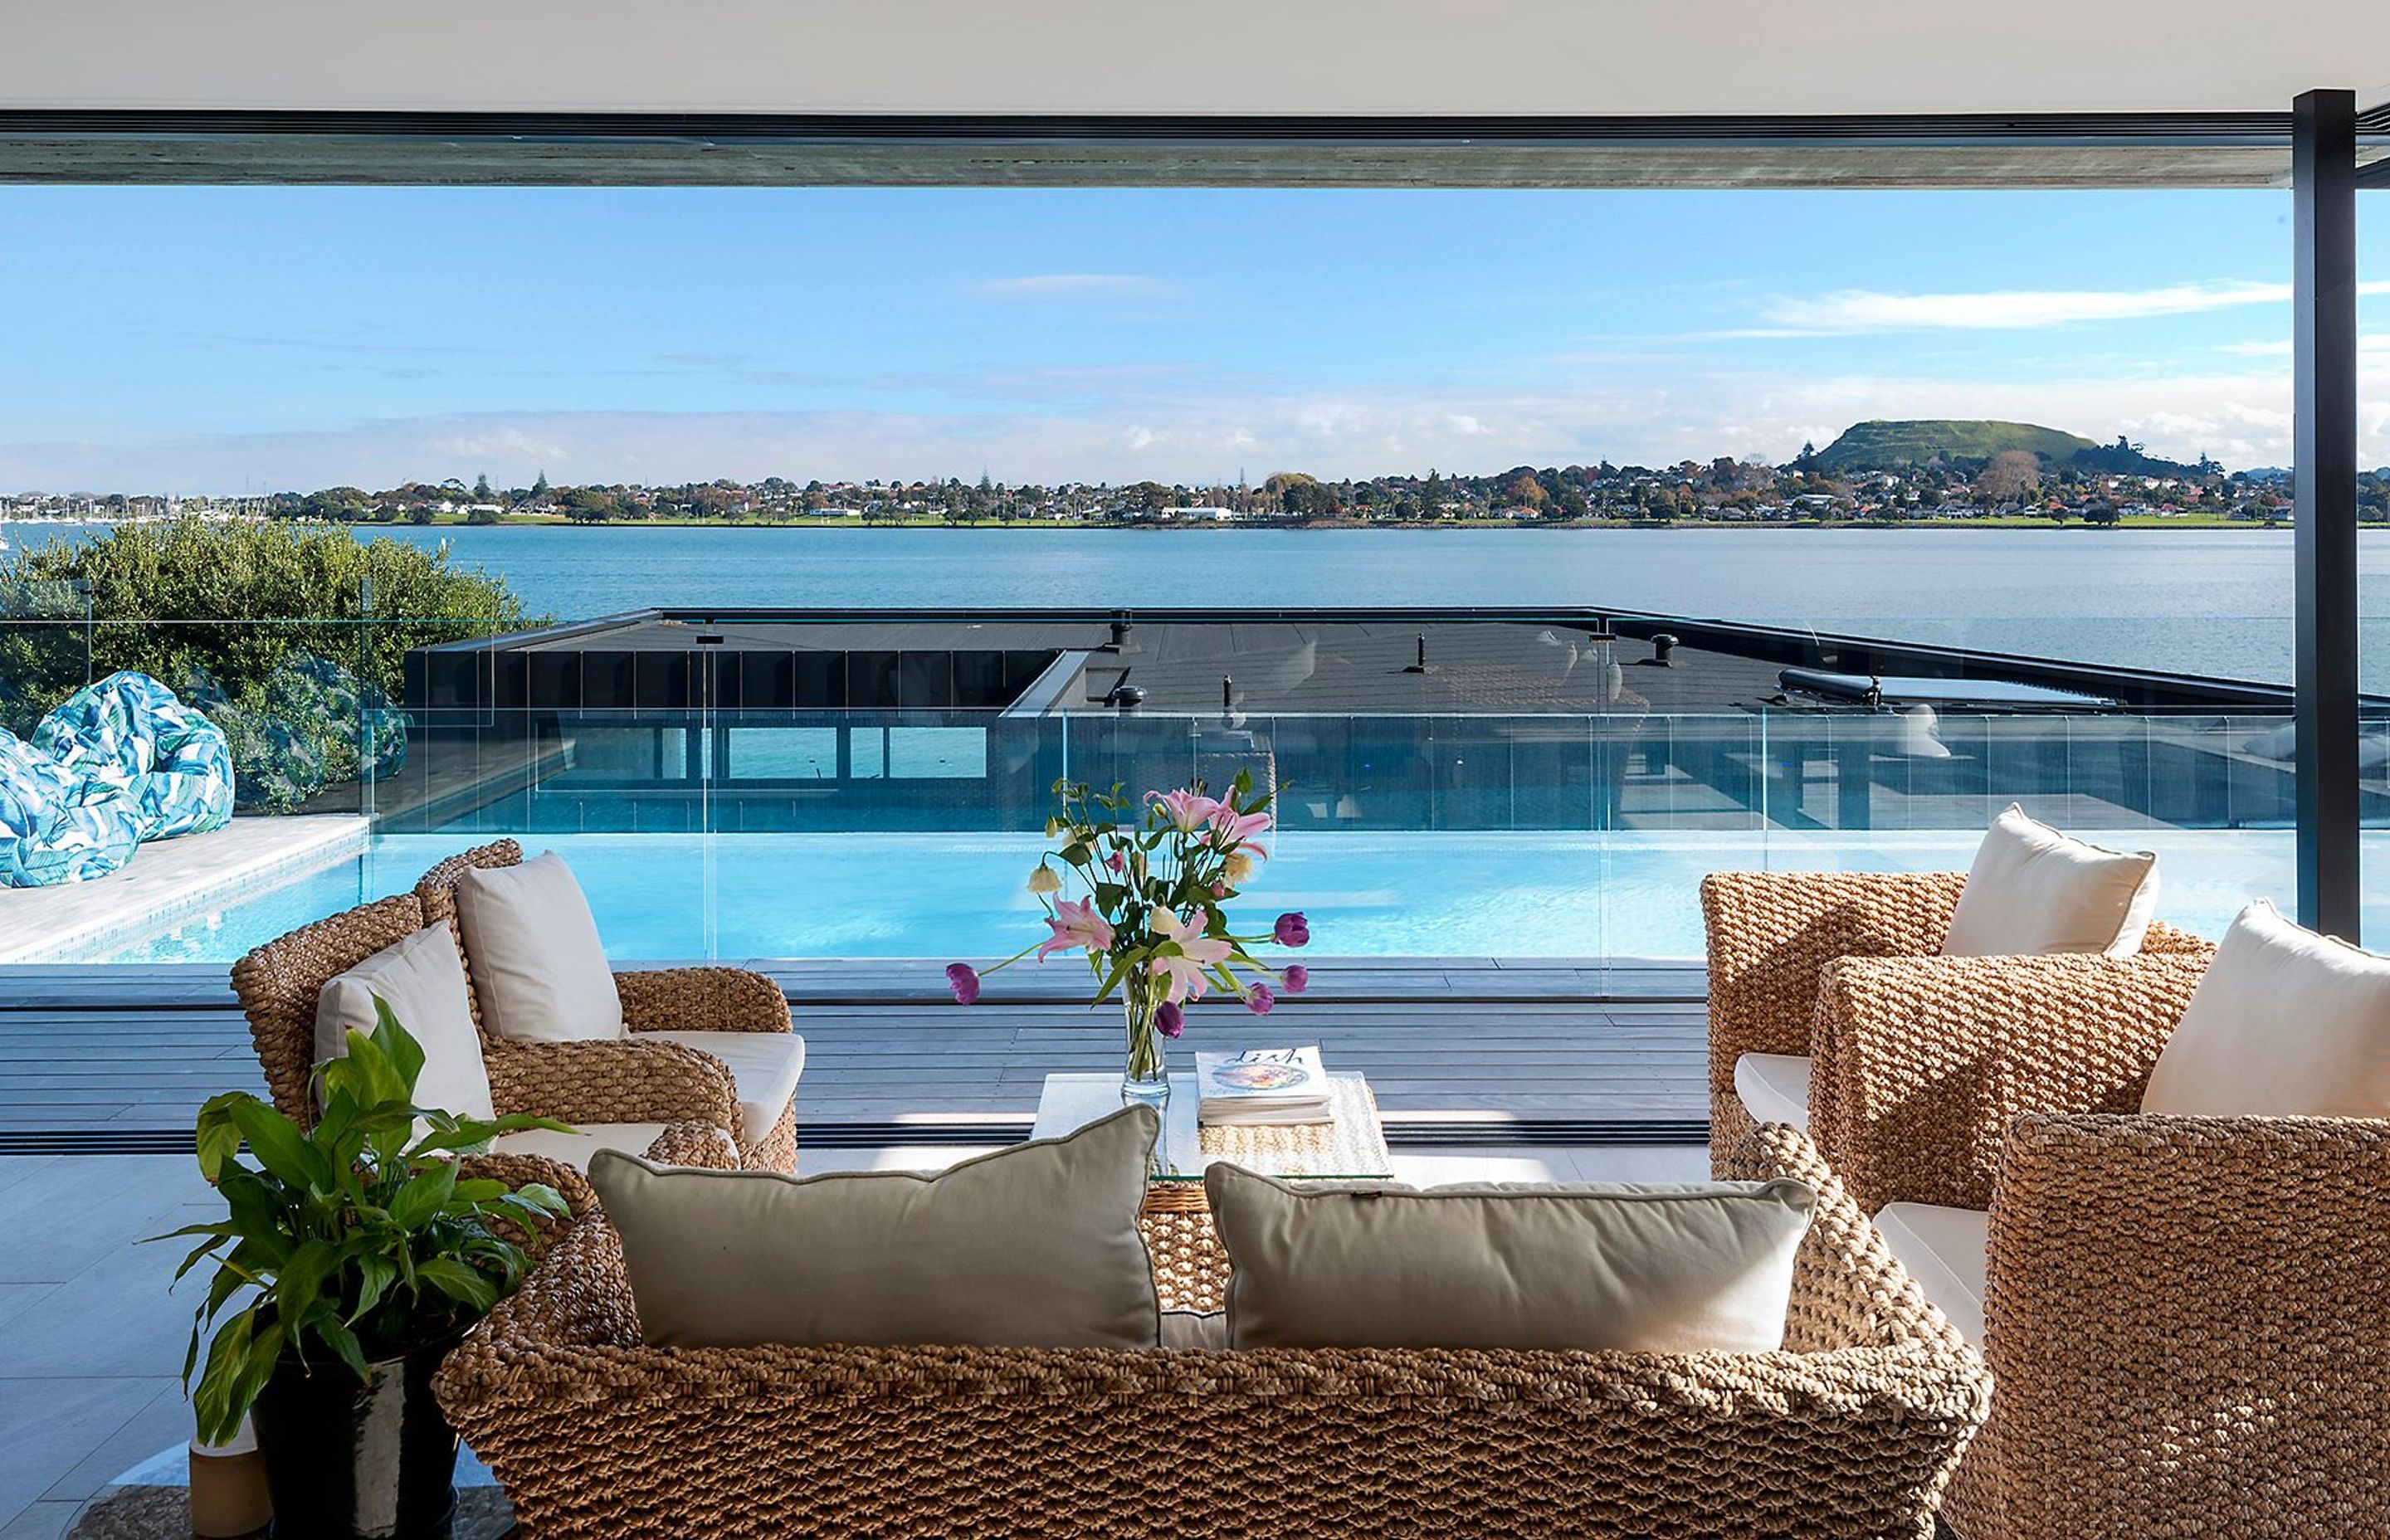 A relaxed and sunny lounging space overlooks the pool and the river view.